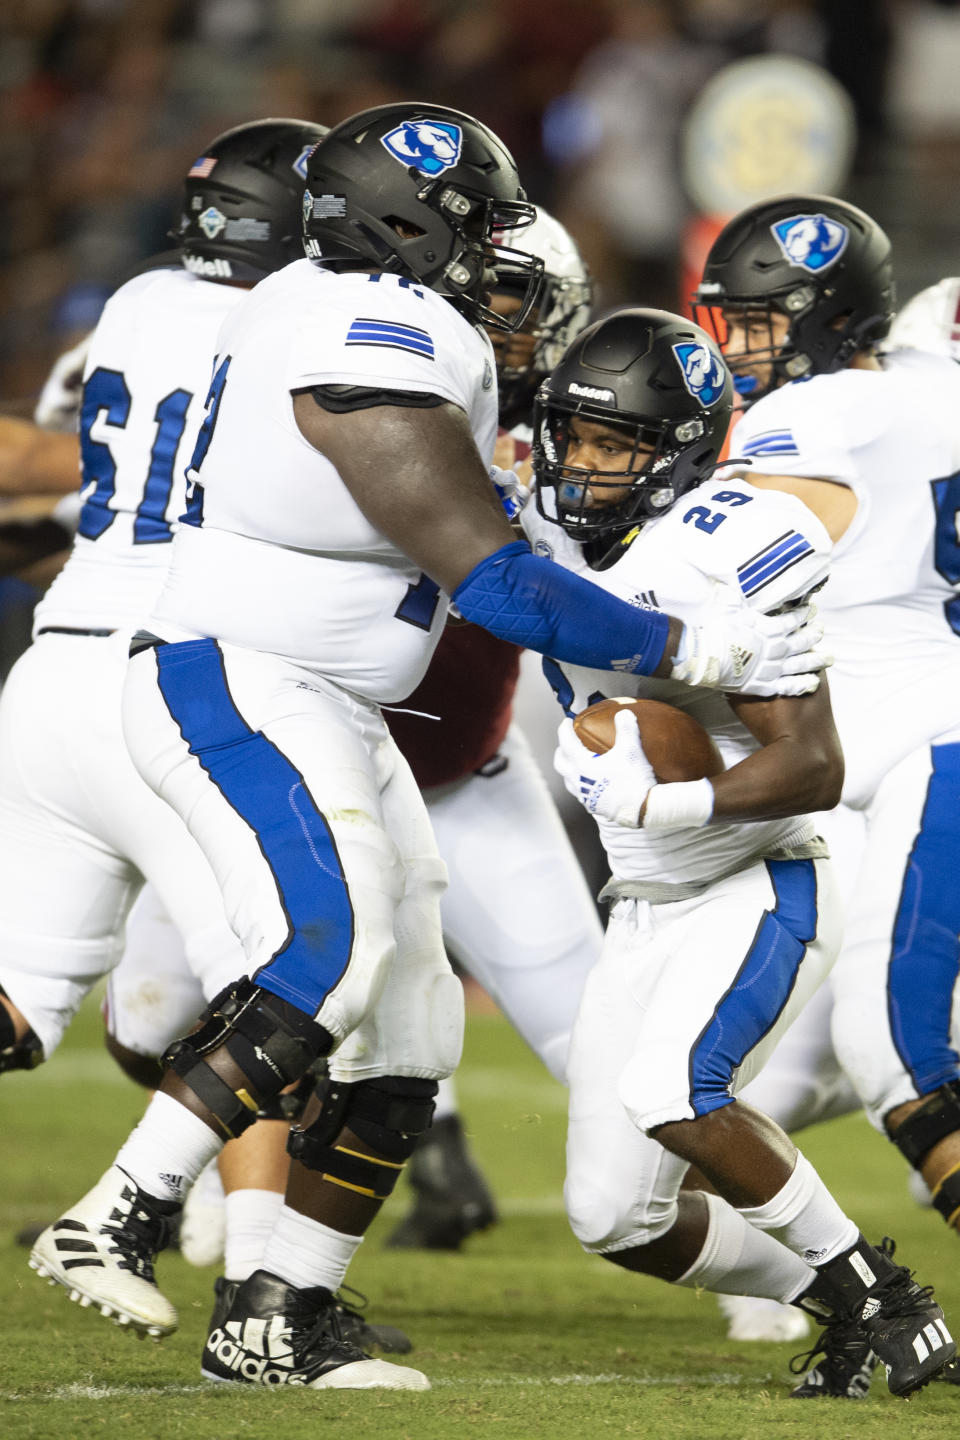 Eastern Illinois running back Kendi Young (29) runs into Eastern Illinois offensive lineman Elkhanan Tanelus (72) during the second half of an NCAA college football game against South Carolina, Saturday, Sept. 4, 2021, in Columbia, S.C. (AP Photo/Hakim Wright Sr.)